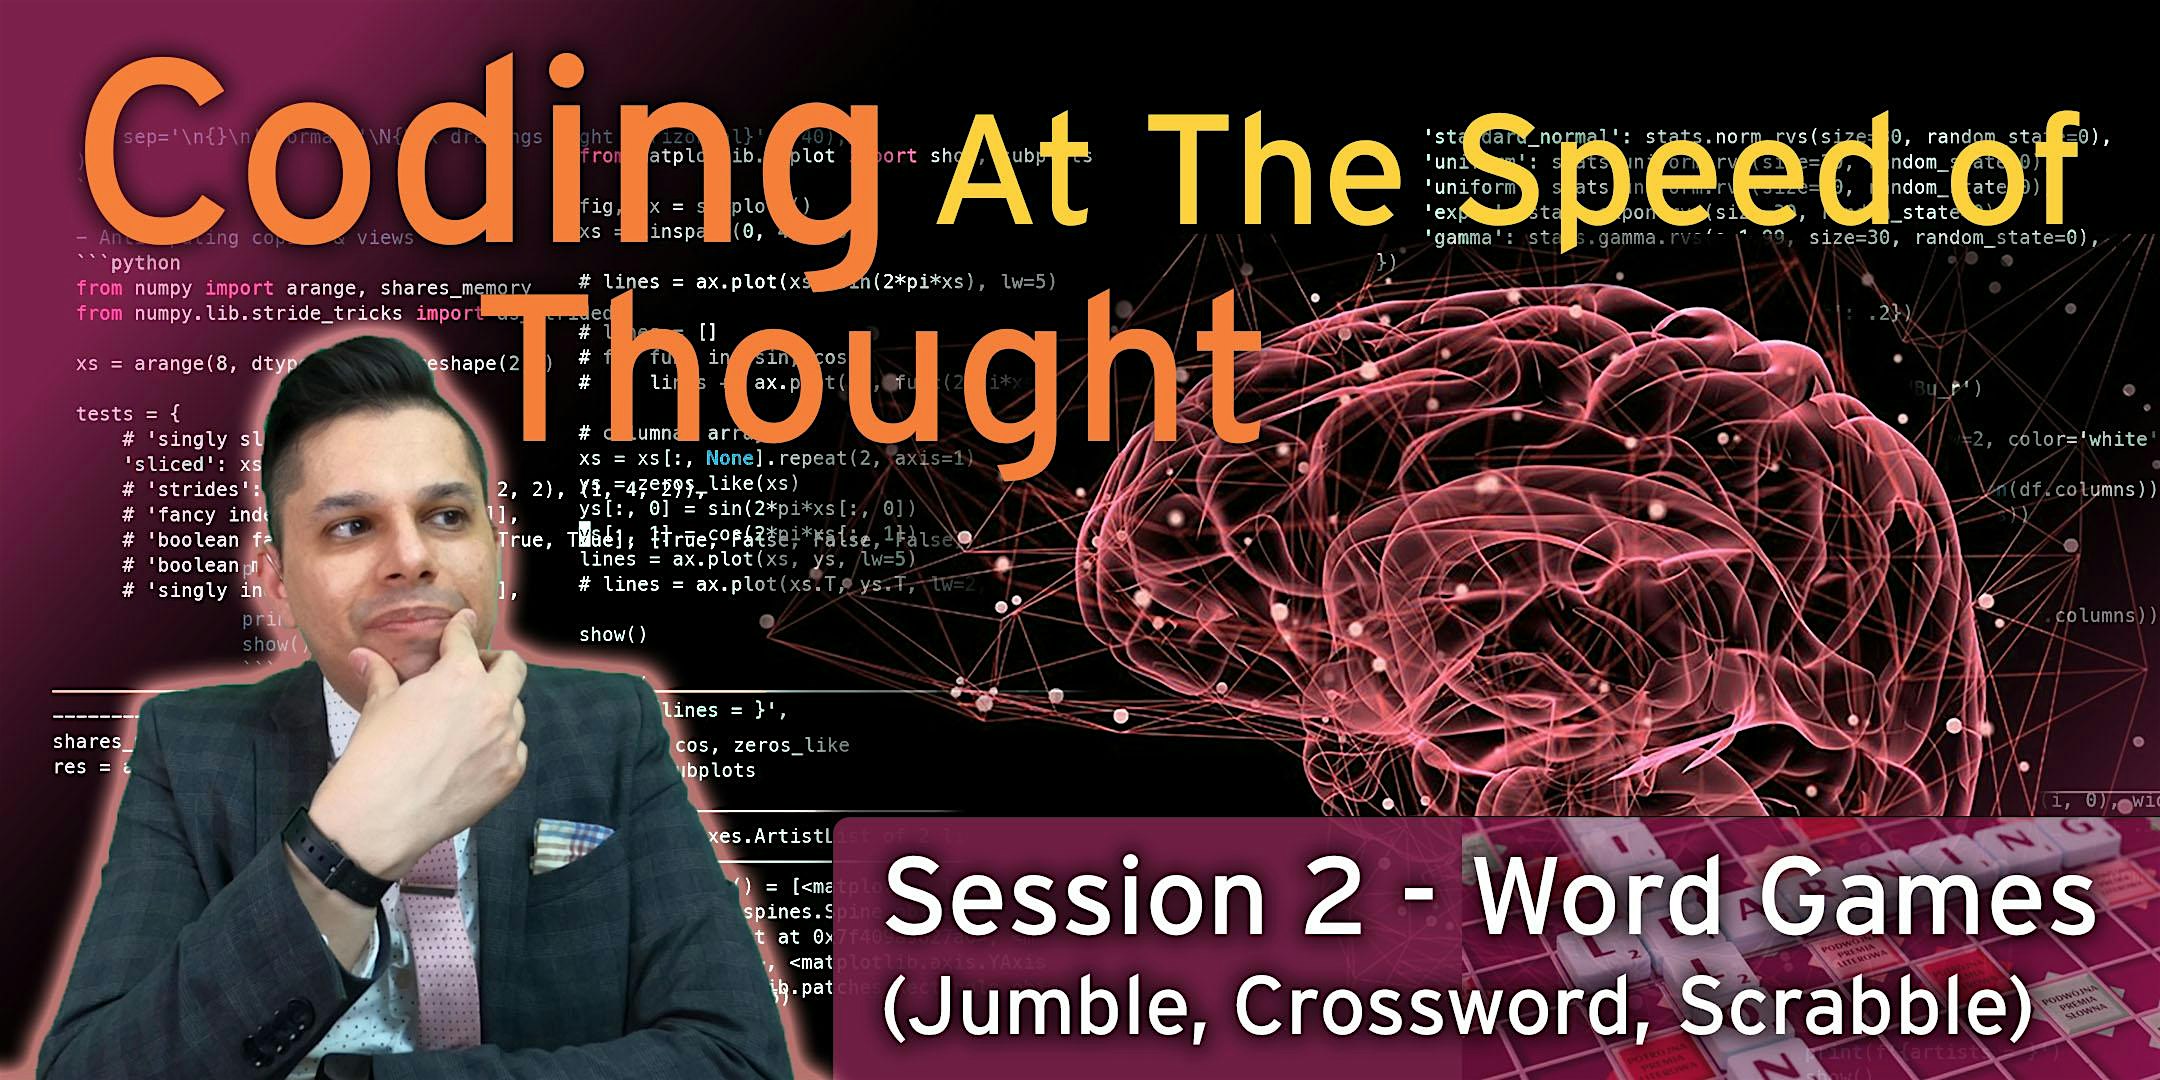 THU, MAY 19, 2022 - Coding at the Speed of Thought ② Jumble, Crossword, Scrabble